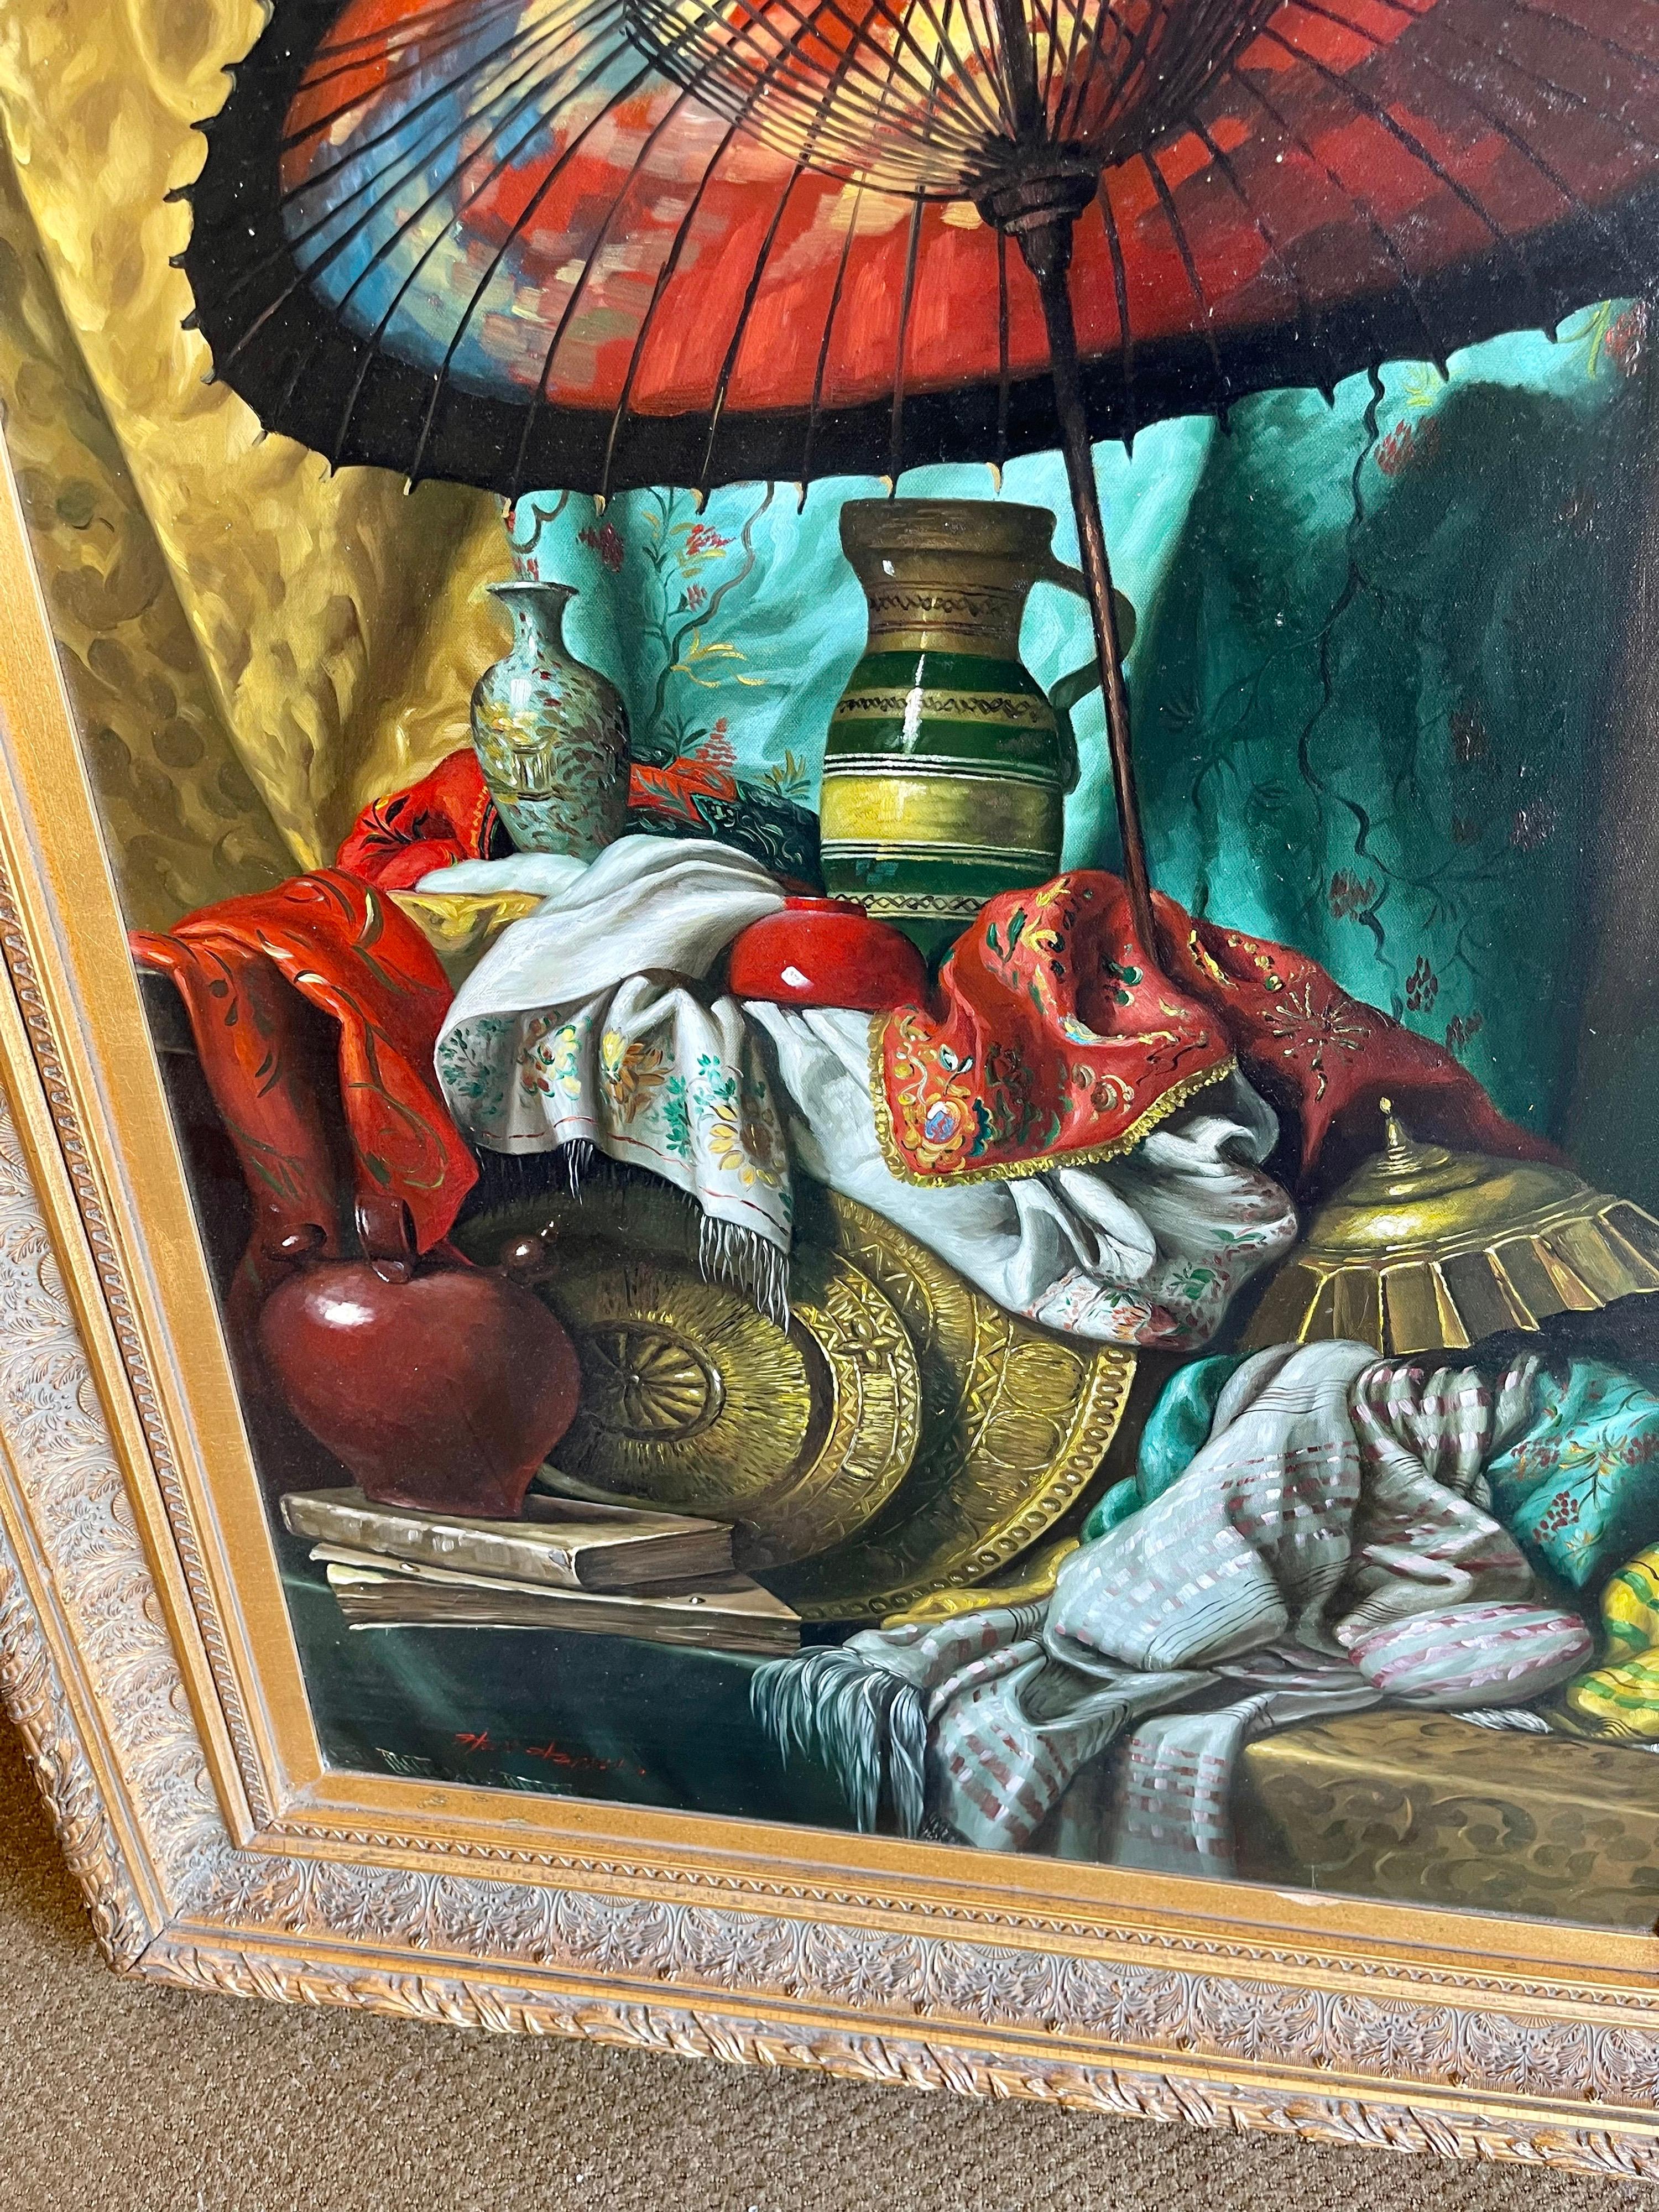 A sumptuous large still life oil painting displaying a Chinese parasol, brass wares and silk fabrics. Very luxurious. Signed by the artist at bottom rather illegibly. Displayed in a fine giltwood frame.